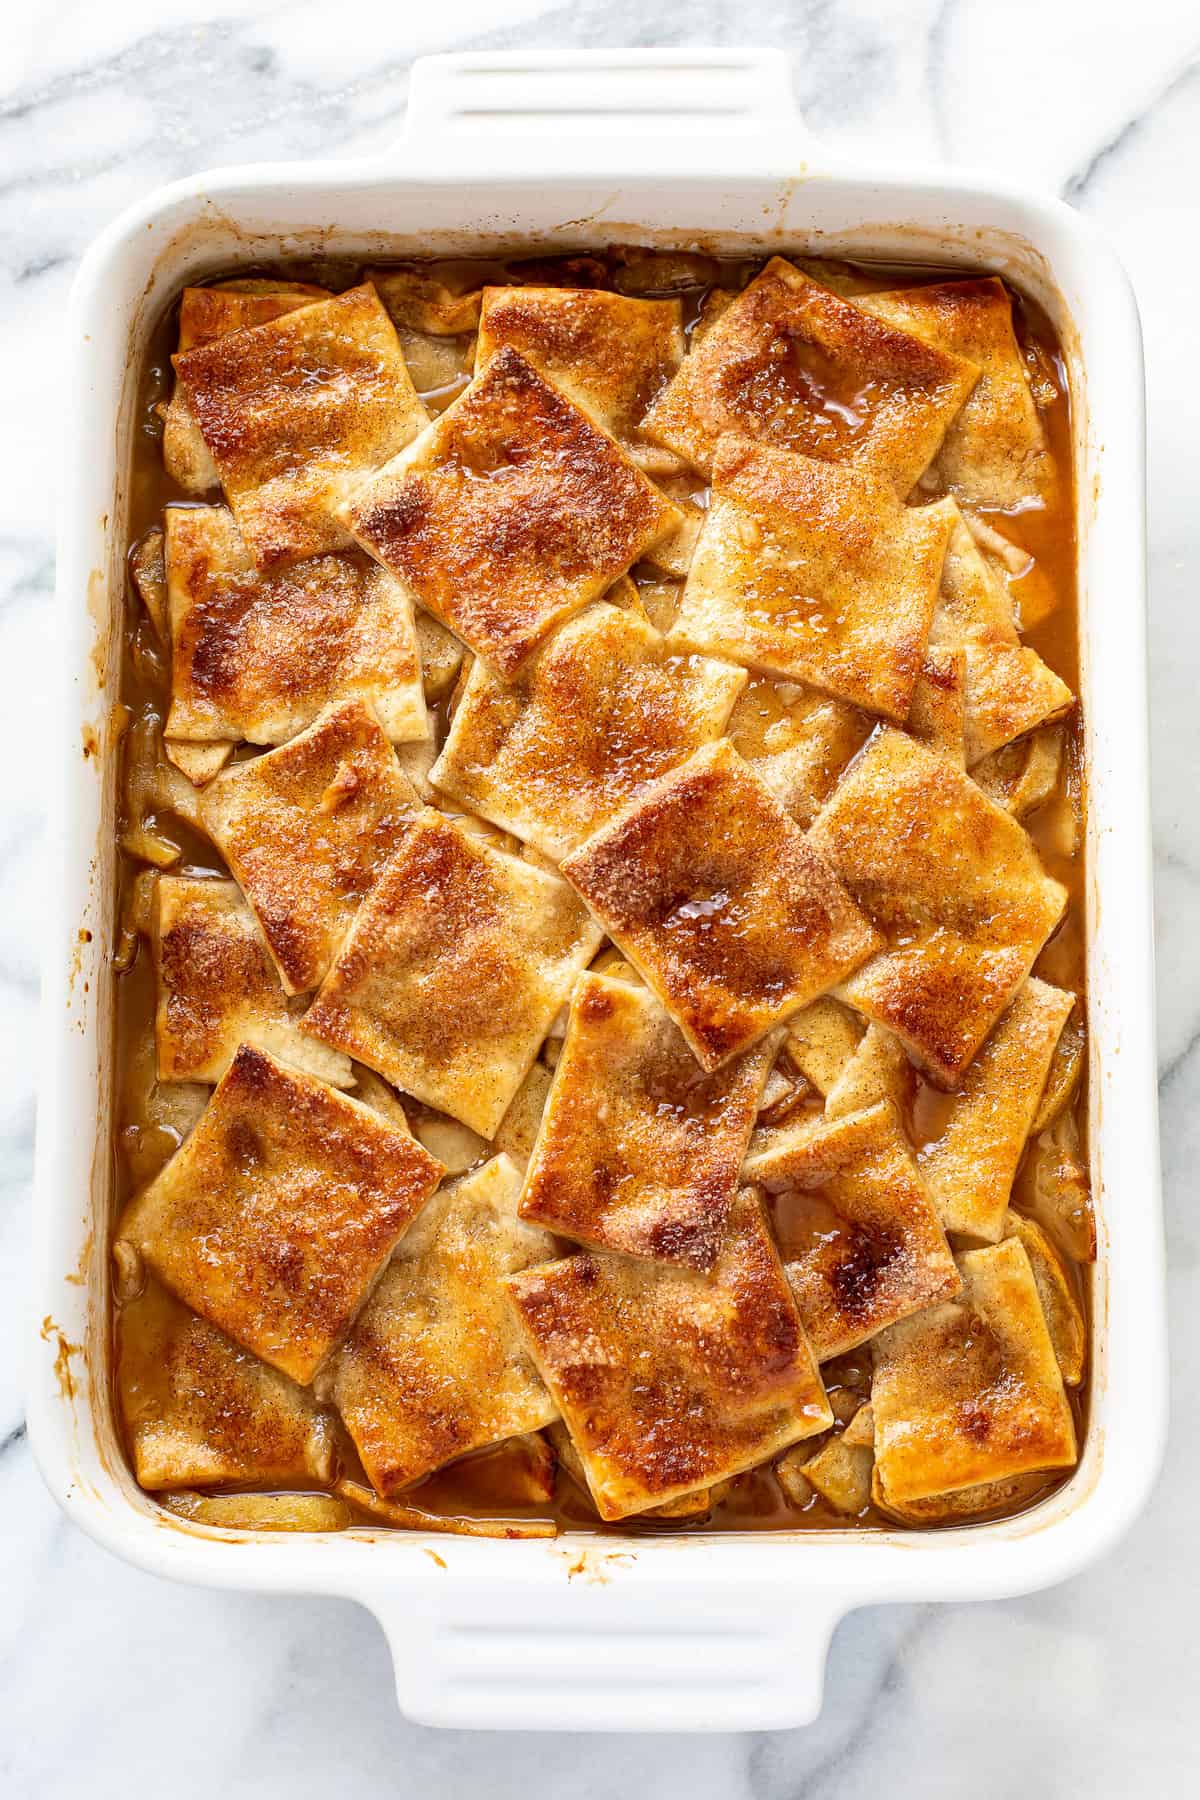 A pan of apple pandowdy with a golden brown top with a cinnamon sugar crust